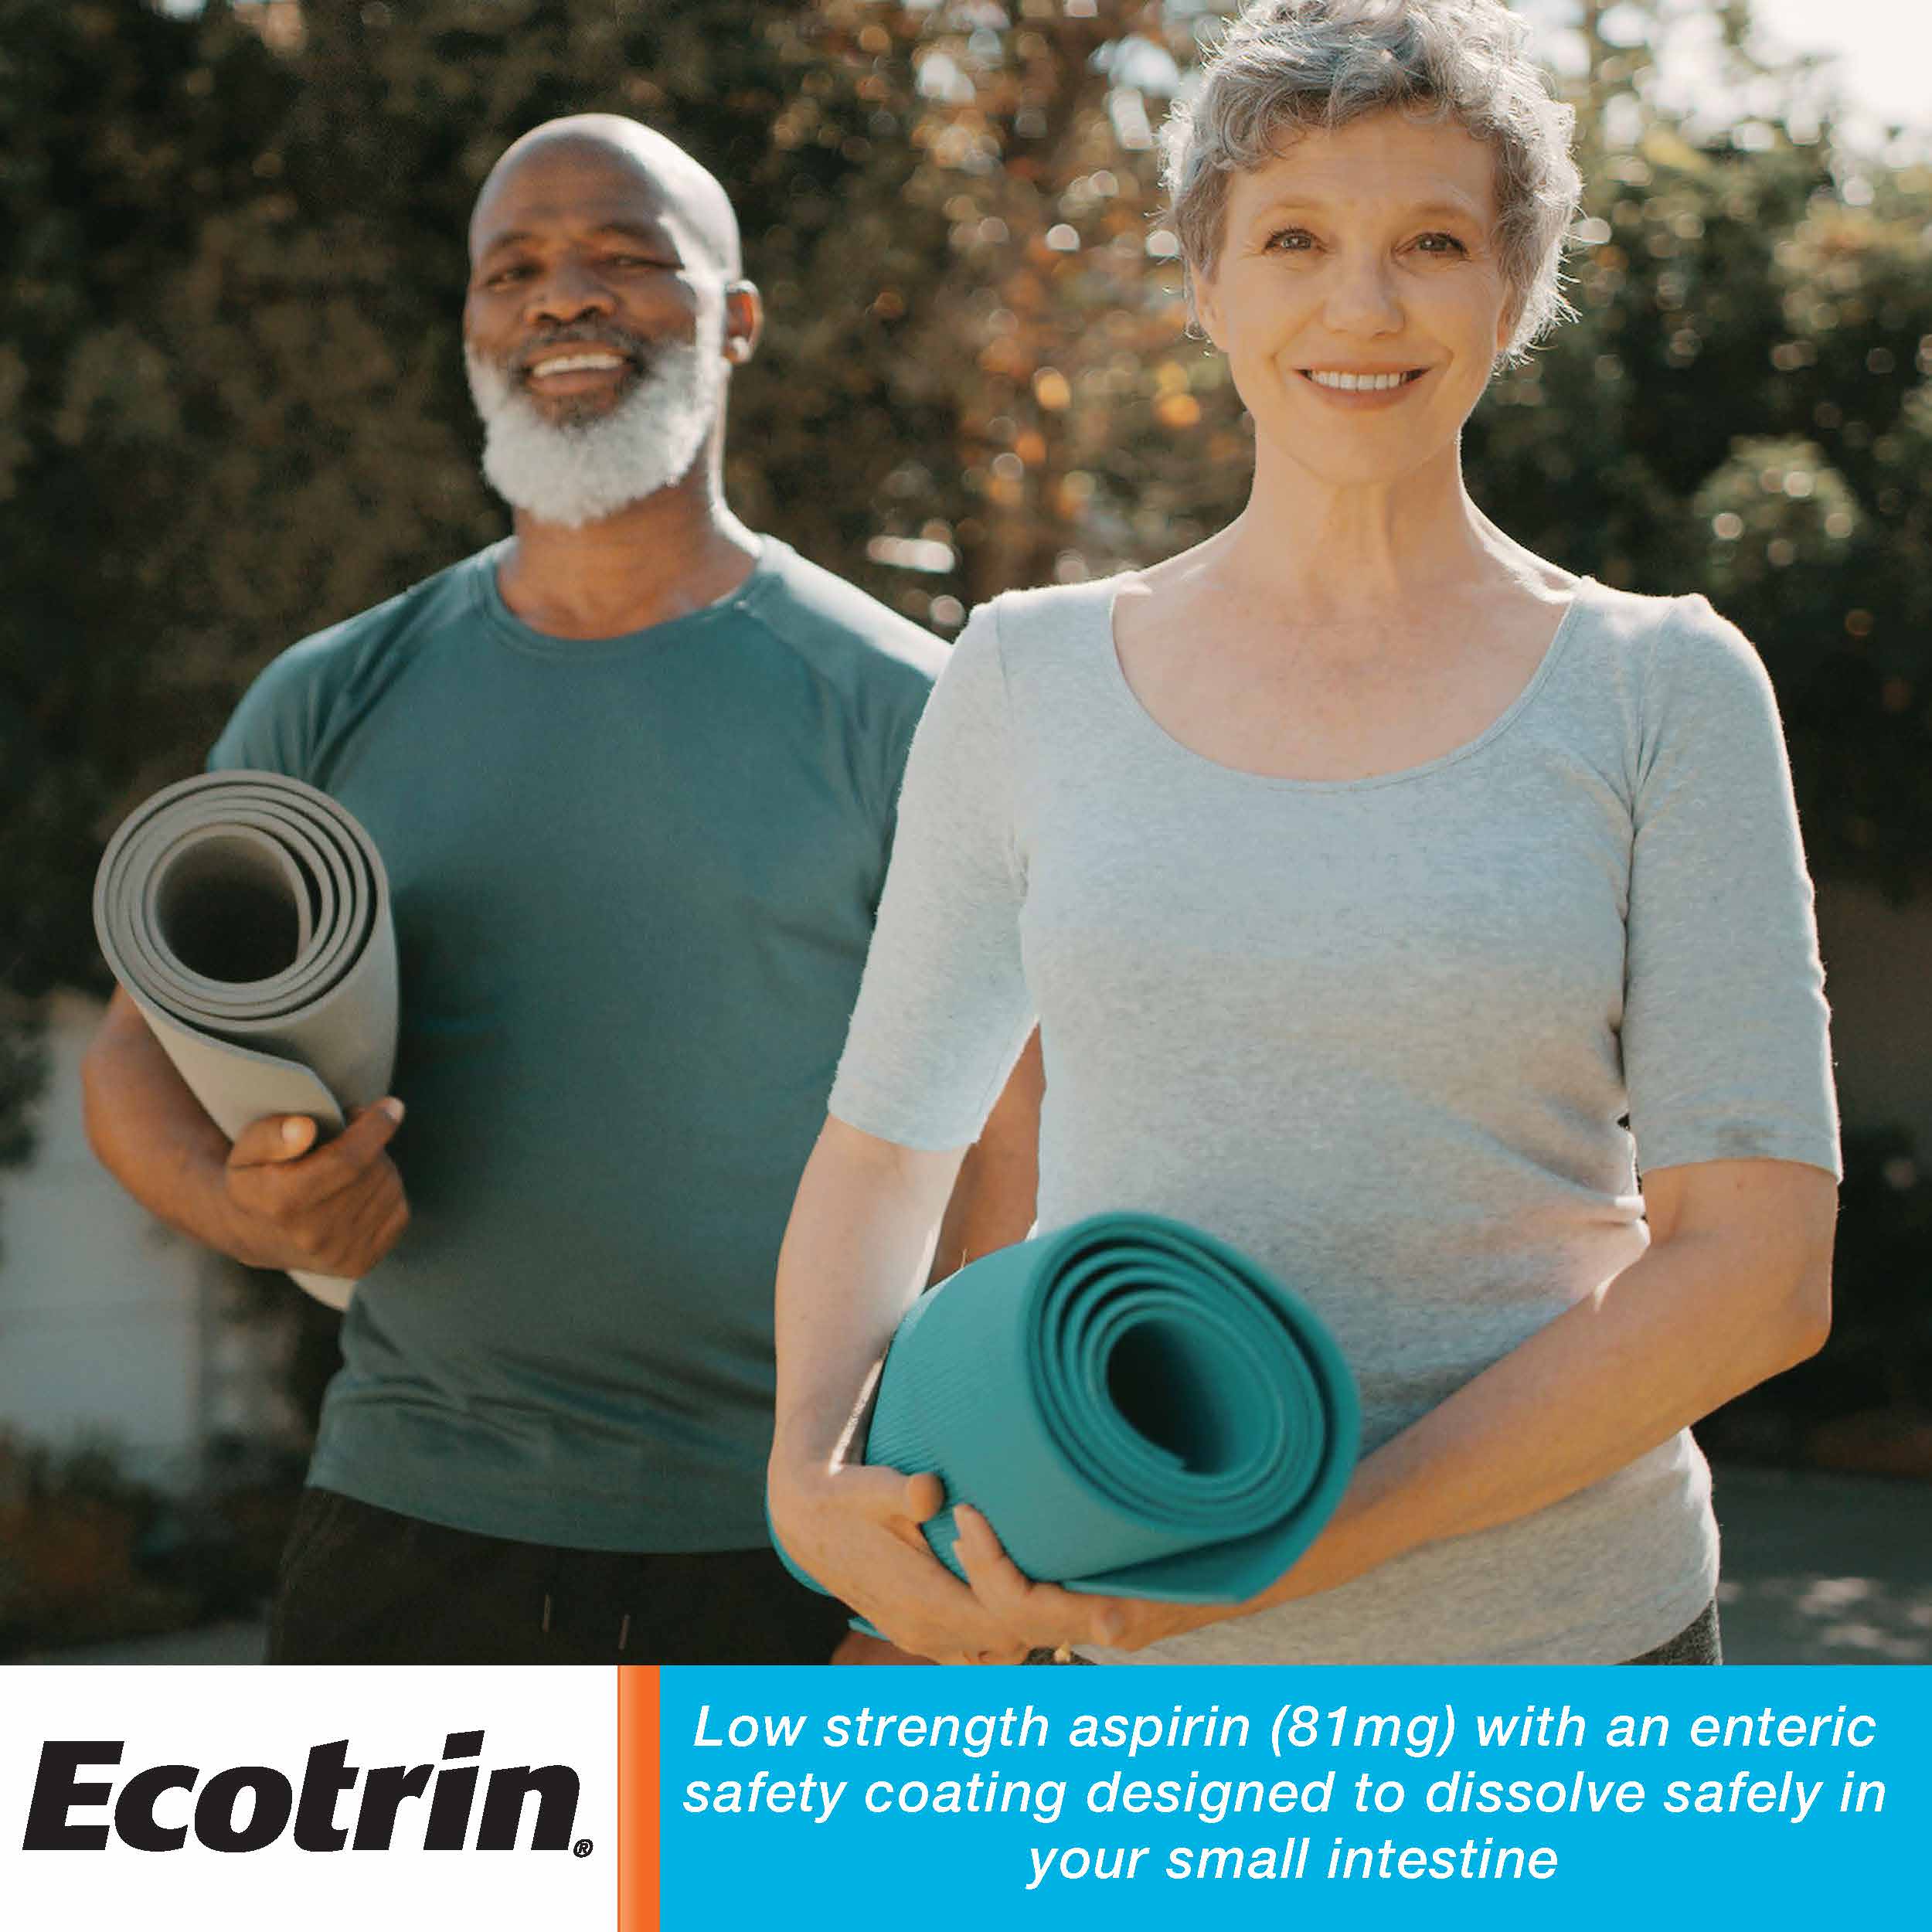 Ecotrin Low Strength Safety Coated Aspirin, NSAID, 81mg, 45 Tablets - image 2 of 4